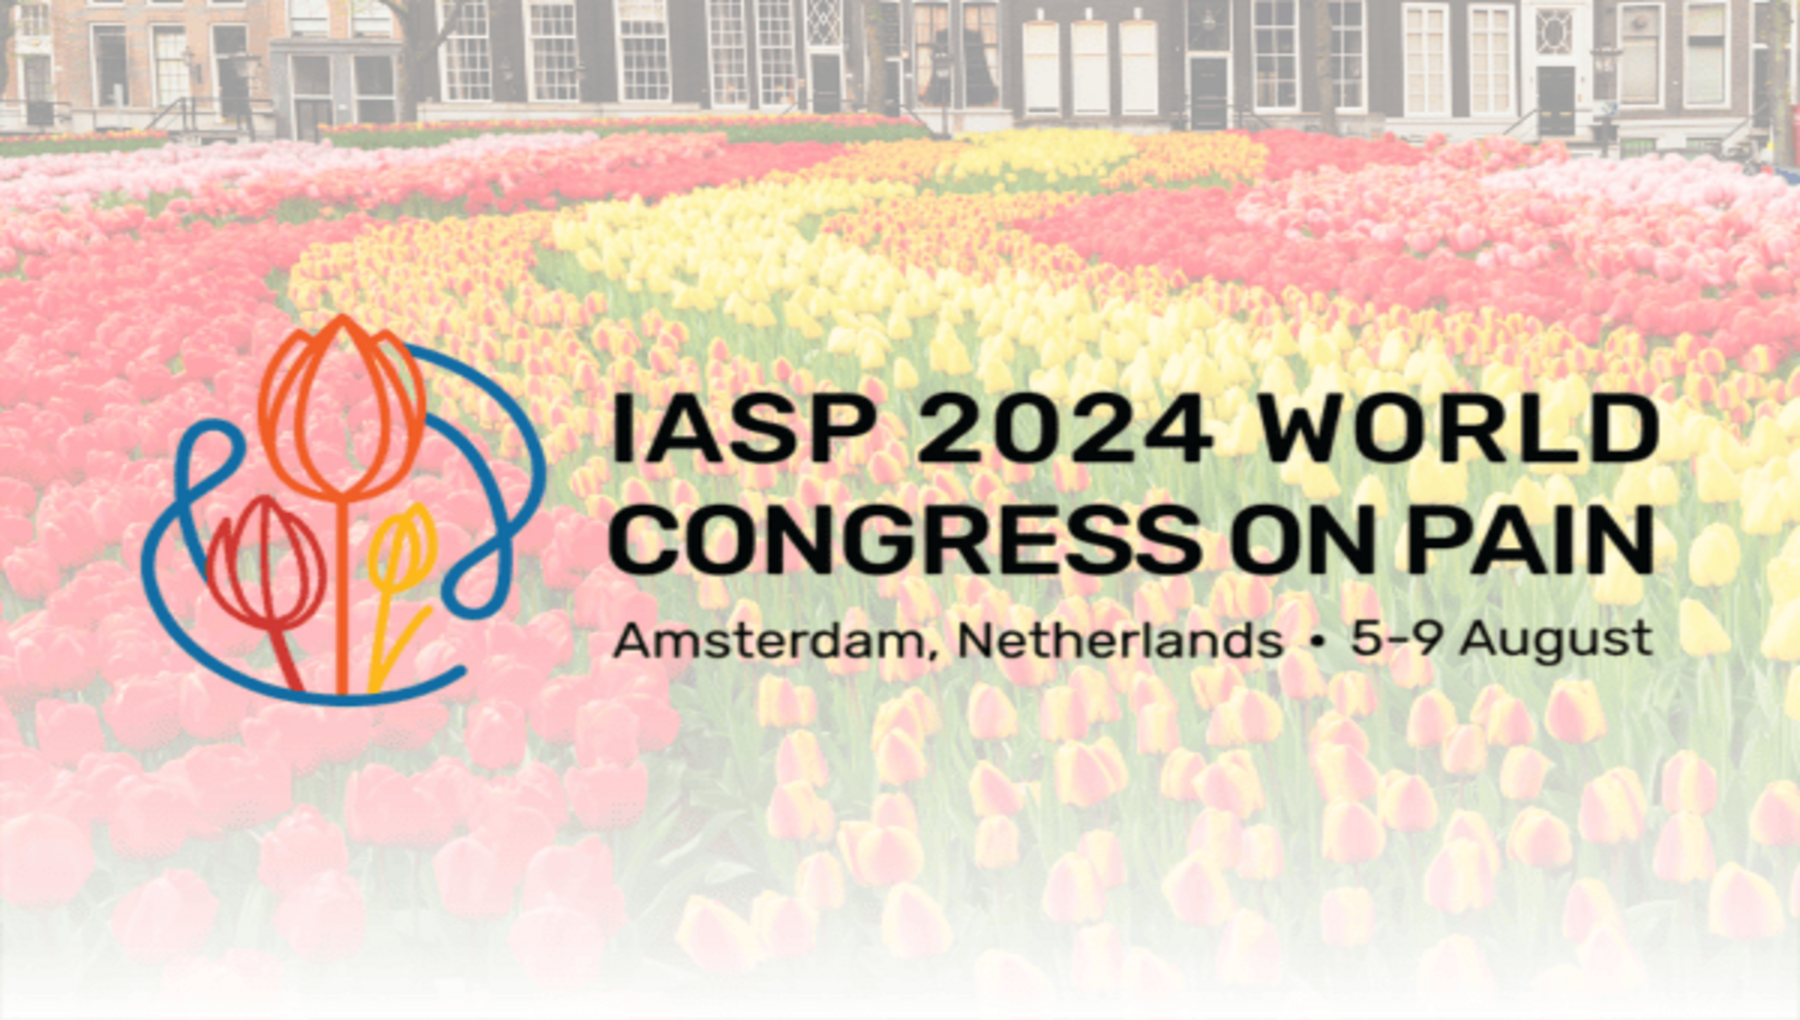 International Association for the Study of Pain 2024 World Congress on Pain